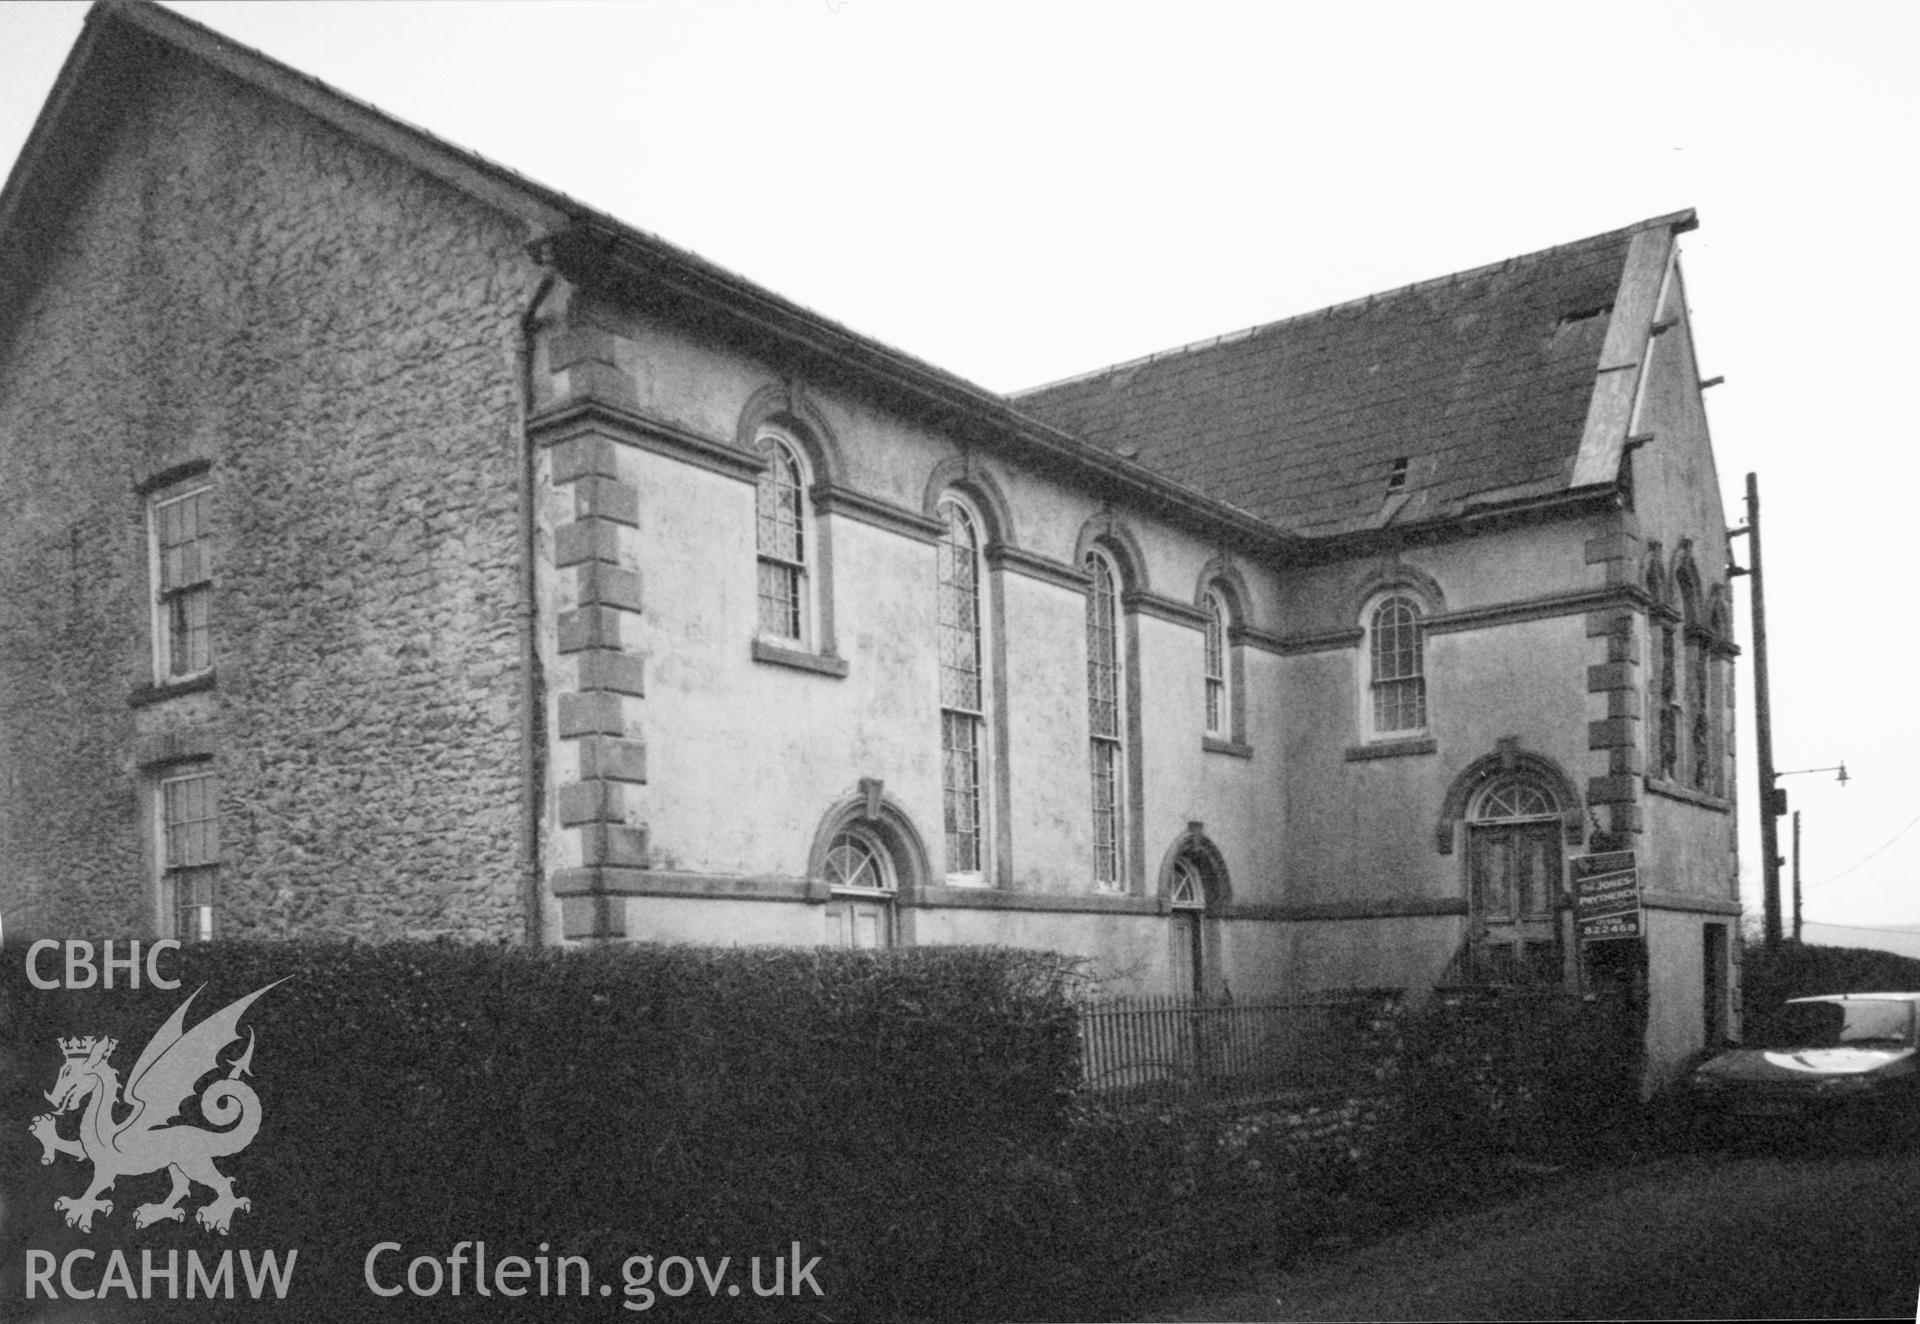 Digital copy of a black and white photograph showing an exterior view of Seion Calvinistic Methodist Chapel, Llansadwrn, taken by Robert Scourfield, 1996.